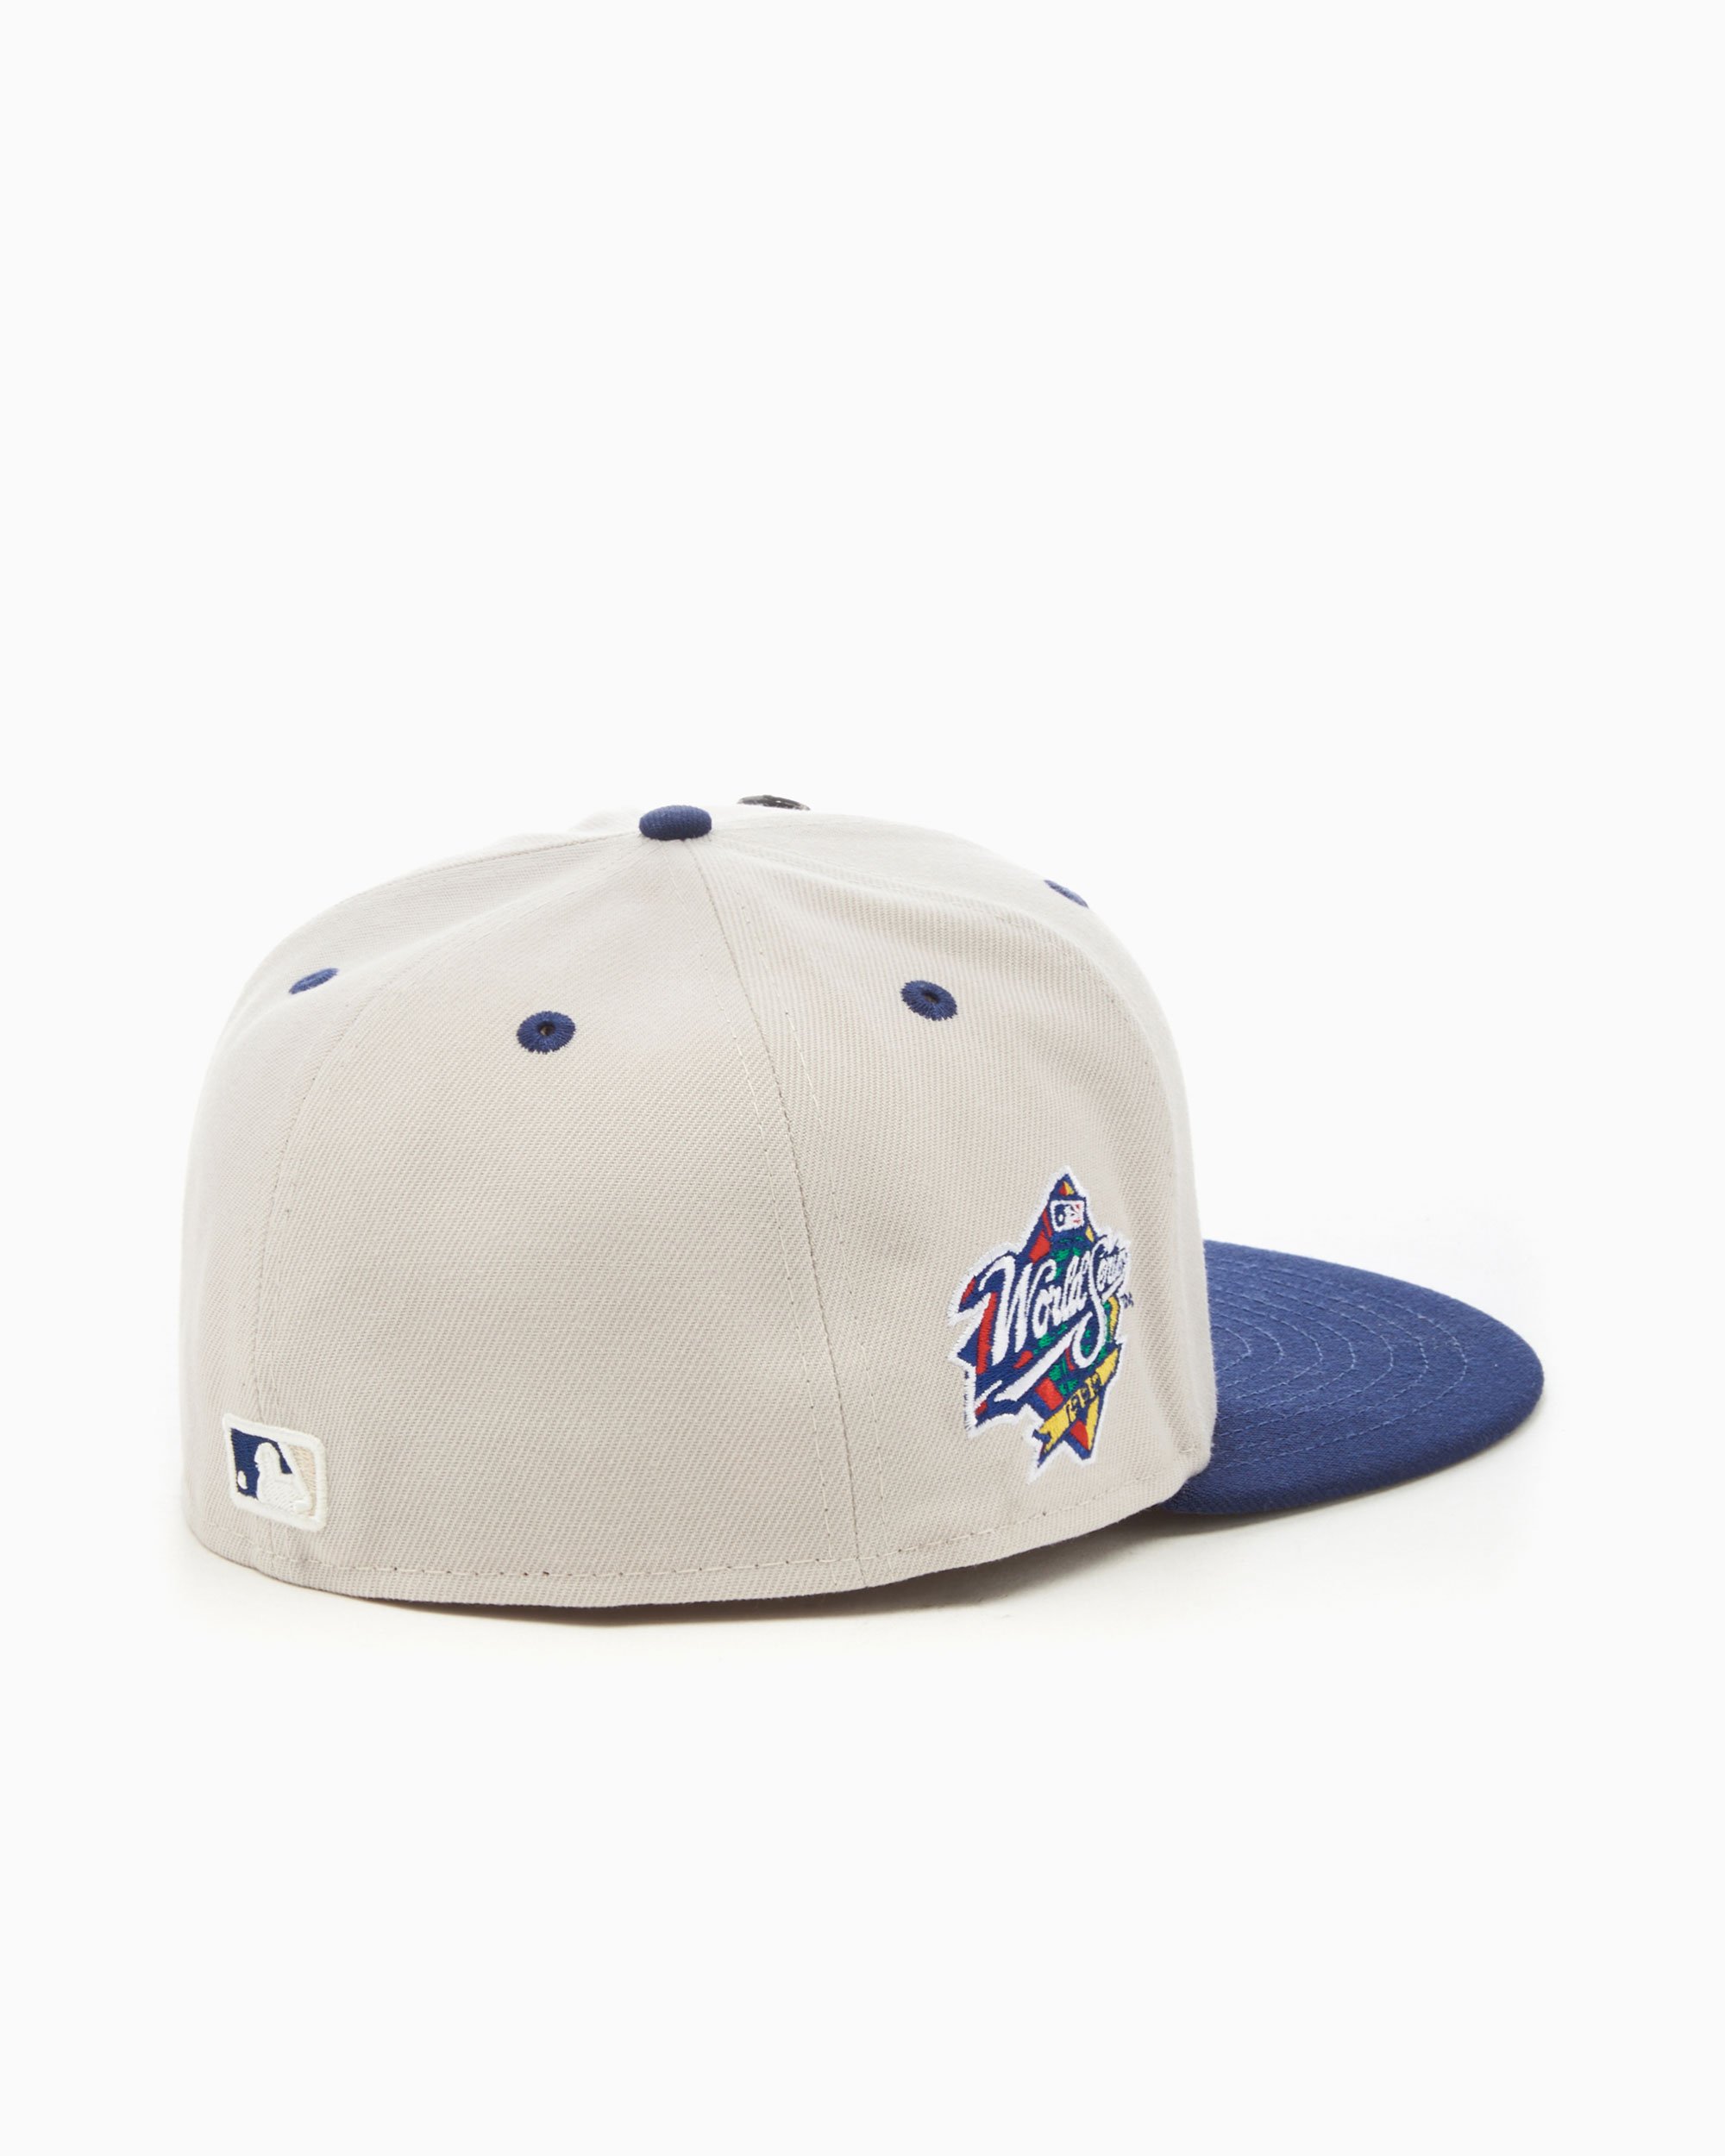 World at Fitted Series Yankees 60357993| Cap New Gray MLB 59FIFTY Online Buy York Era New FOOTDISTRICT Unisex